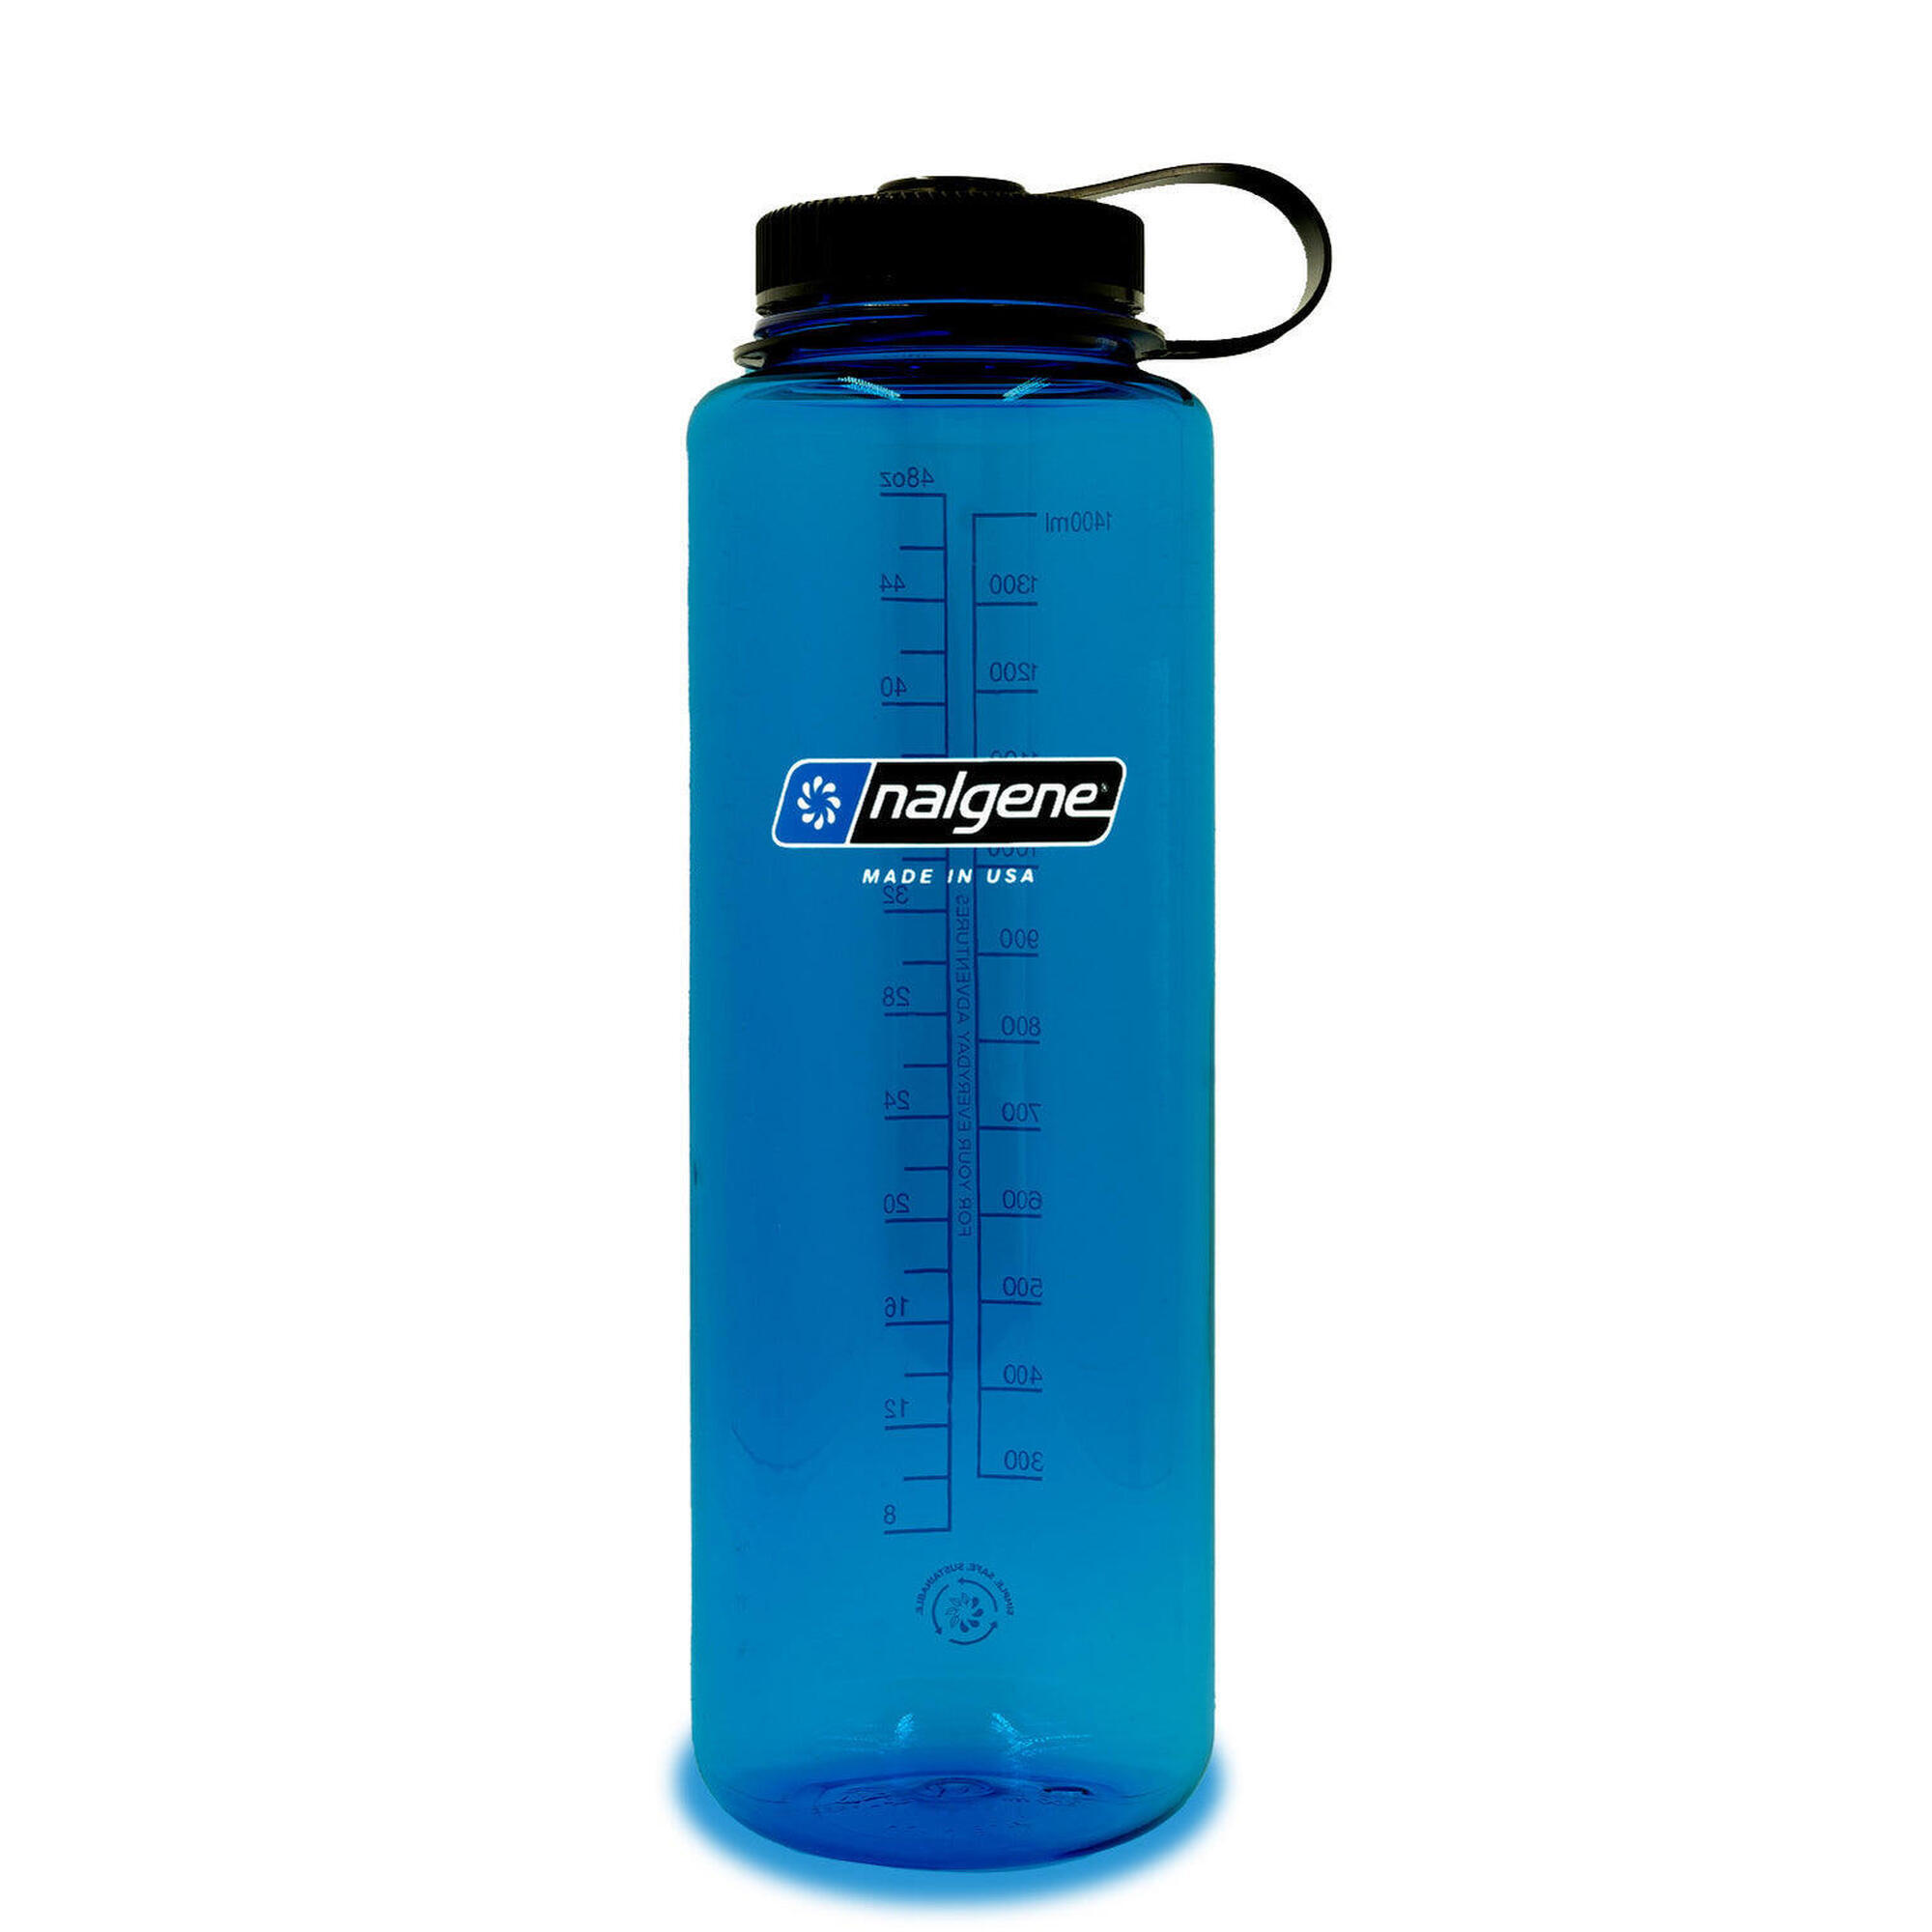 NALGENE 1.5L Wide Mouth Sustain Water Bottle - Made From 50% Plastic Waste - Blue